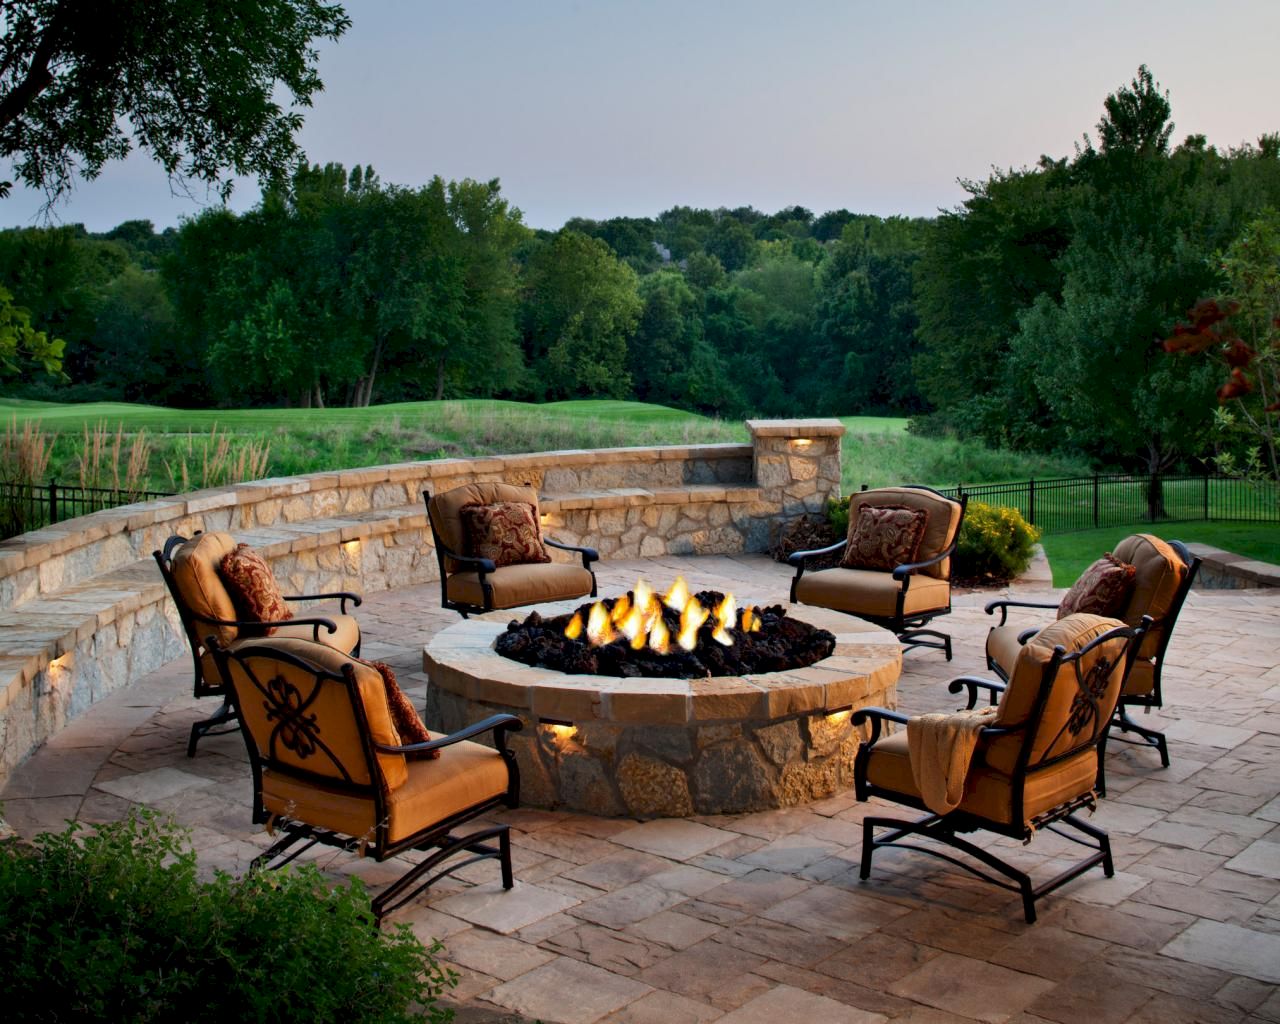 /wp-content/uploads/2019/01/Round-firepit-design-for-outdoor-living-and-gathering-space-ideas-Part-12.jpeg